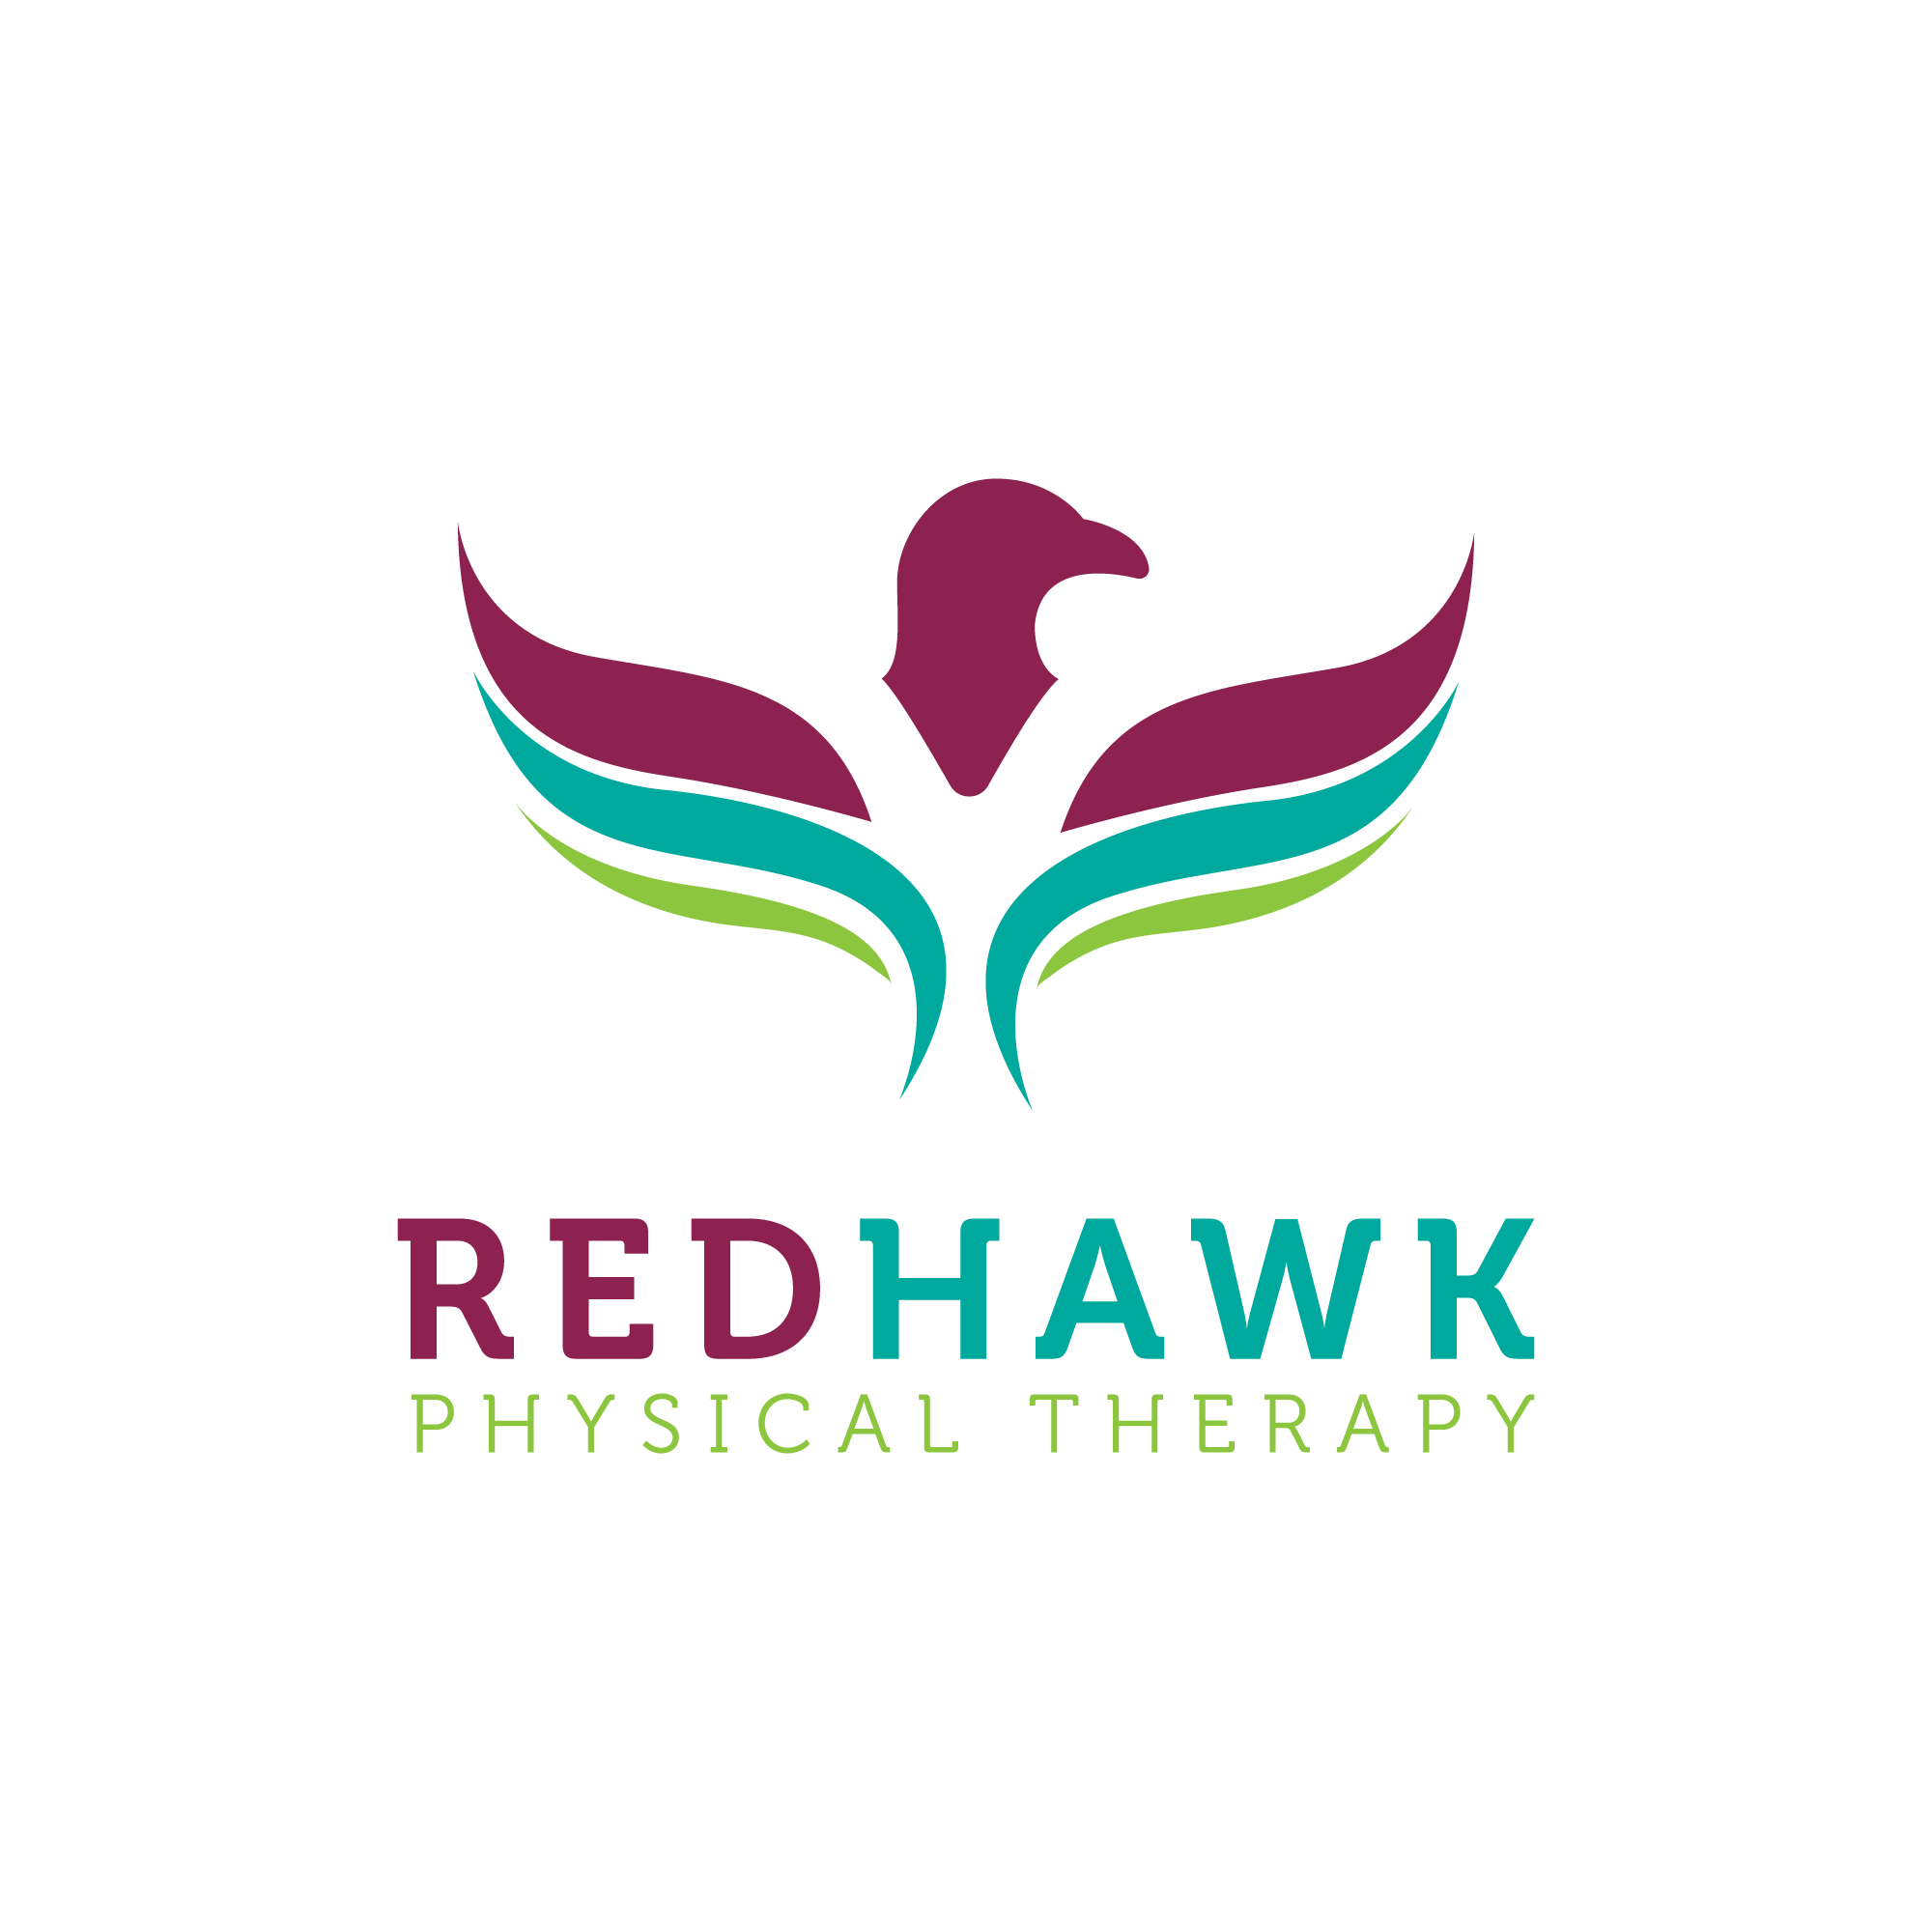 Redhawk Physical Therapy